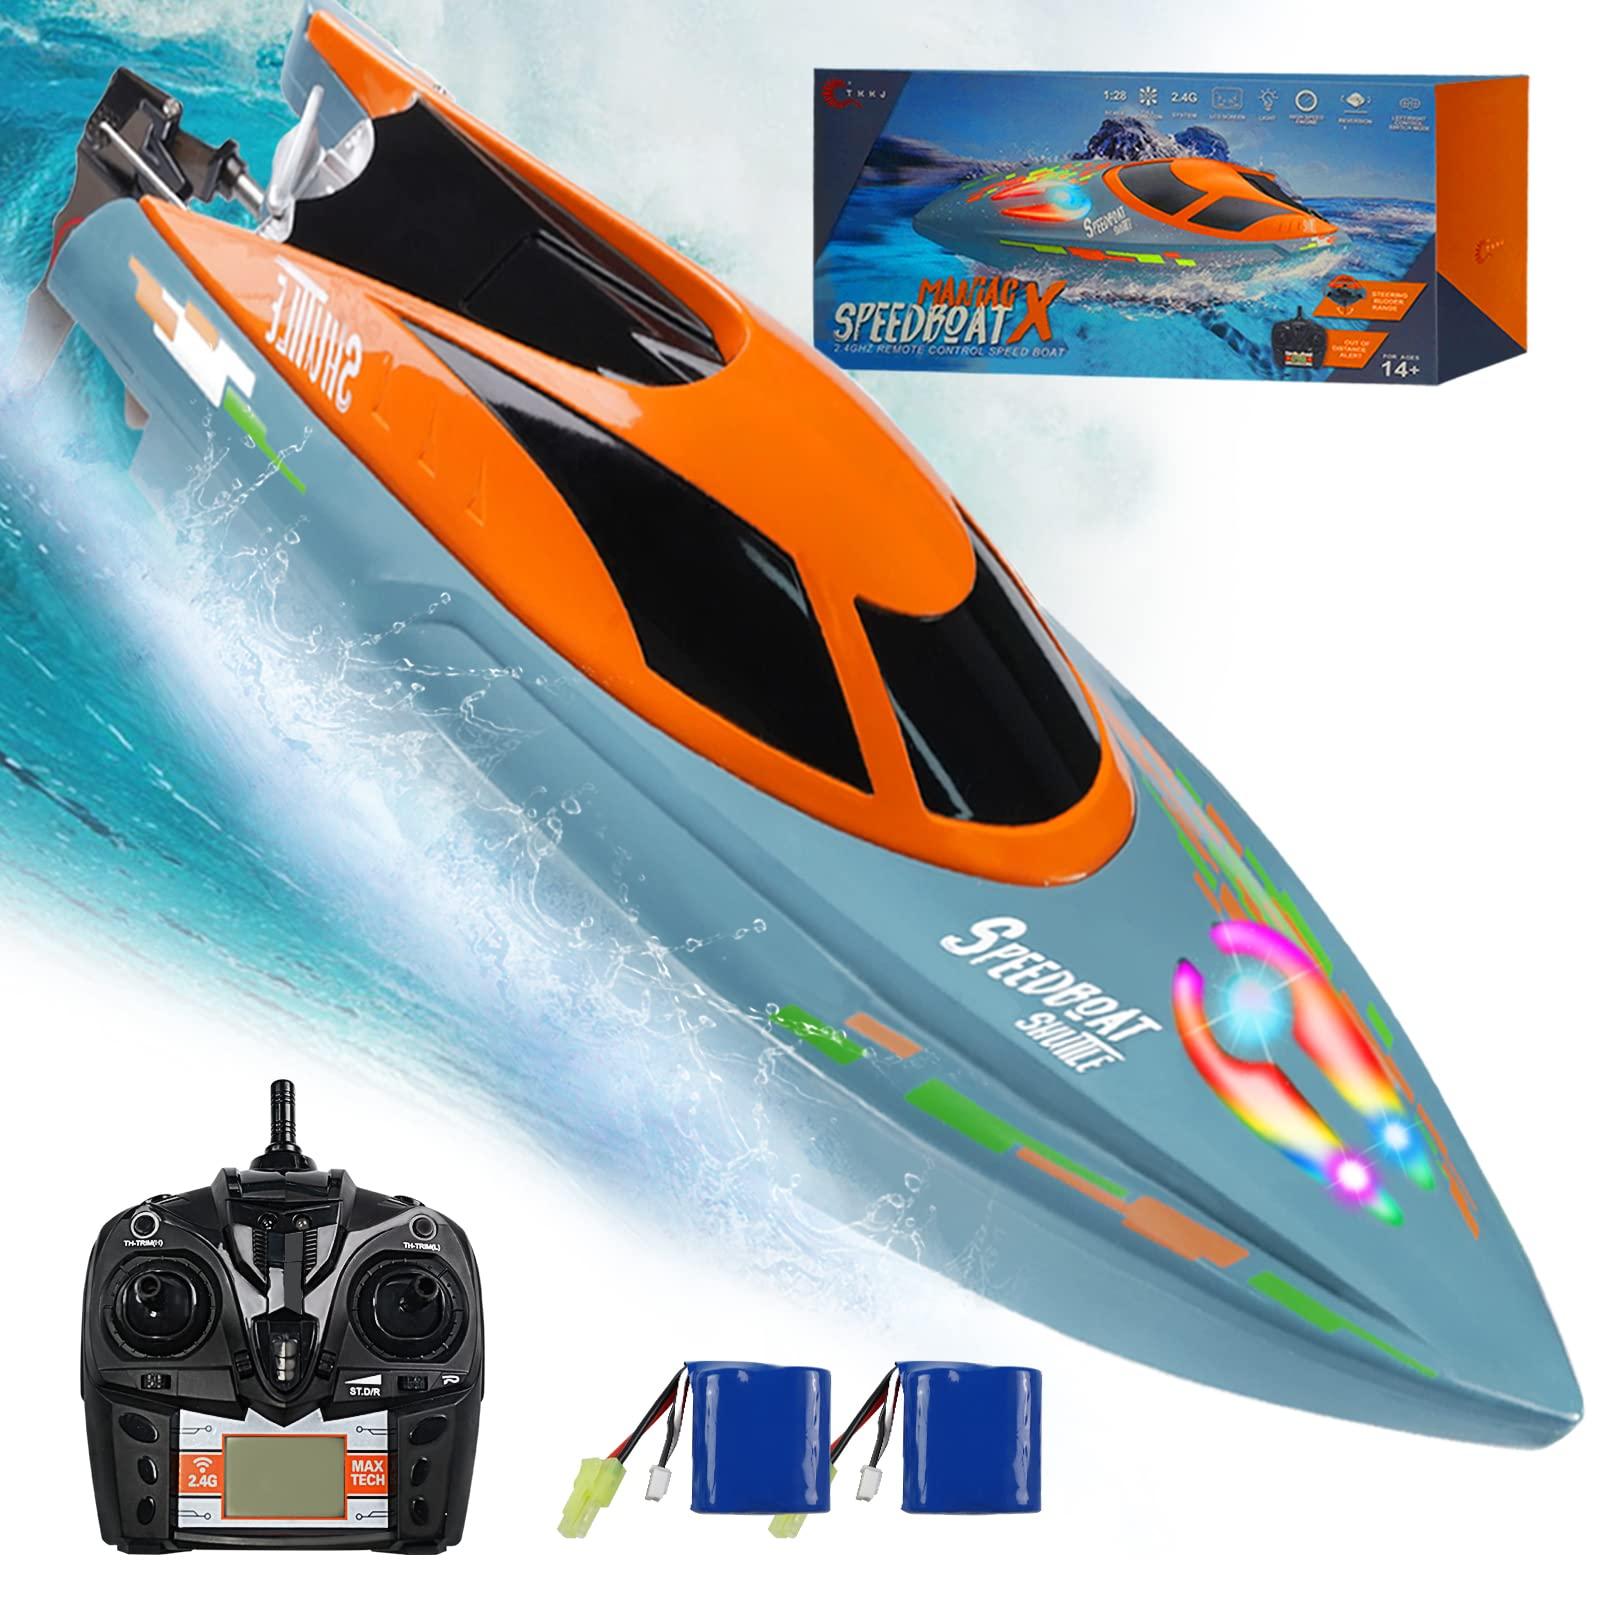 Rc Boats Amazon: Choosing the Perfect RC Boat from Amazon